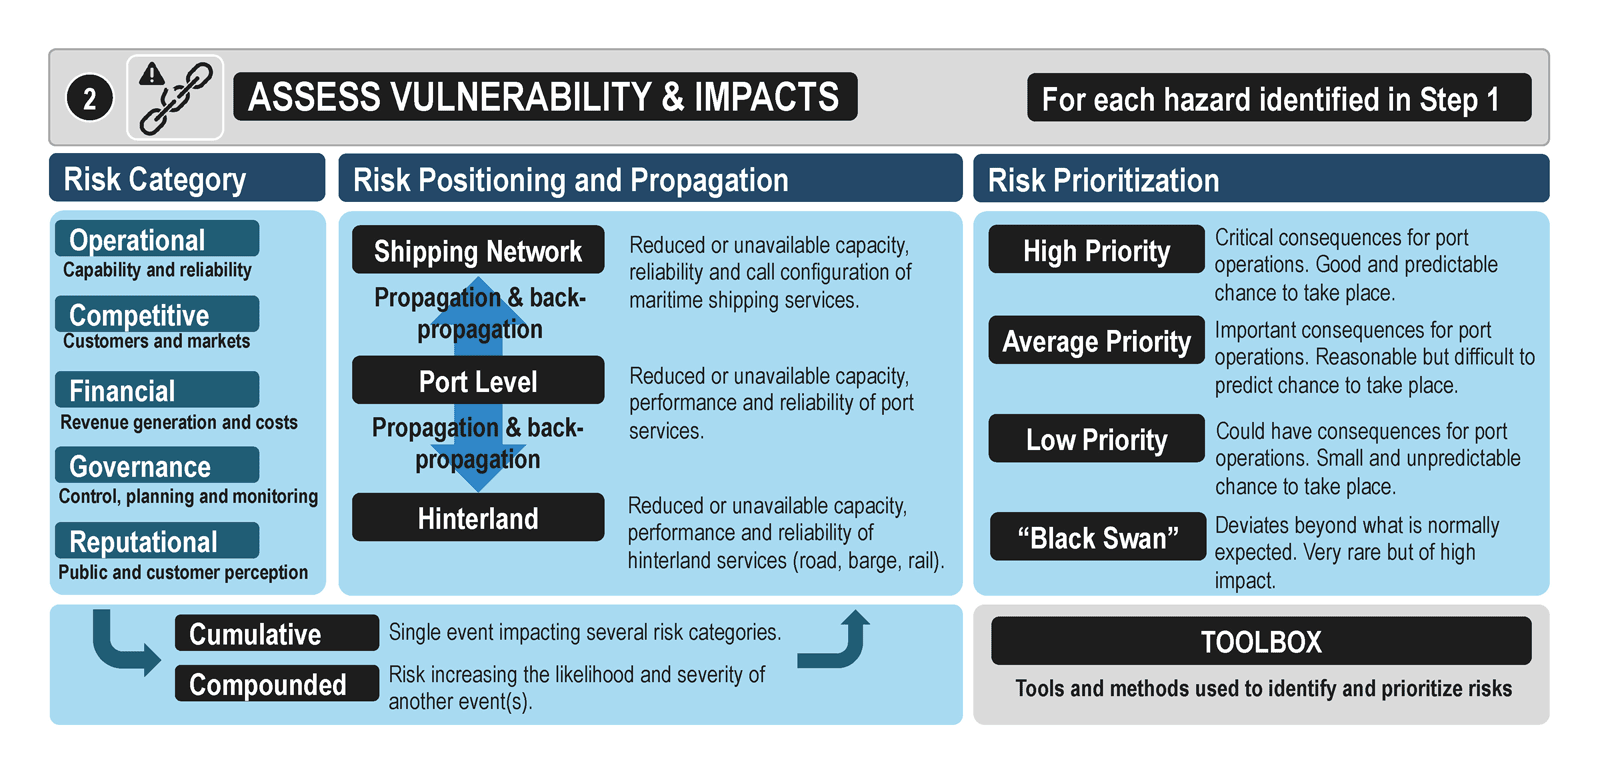 Step 2 – Assessment of port vulnerability and potential impacts